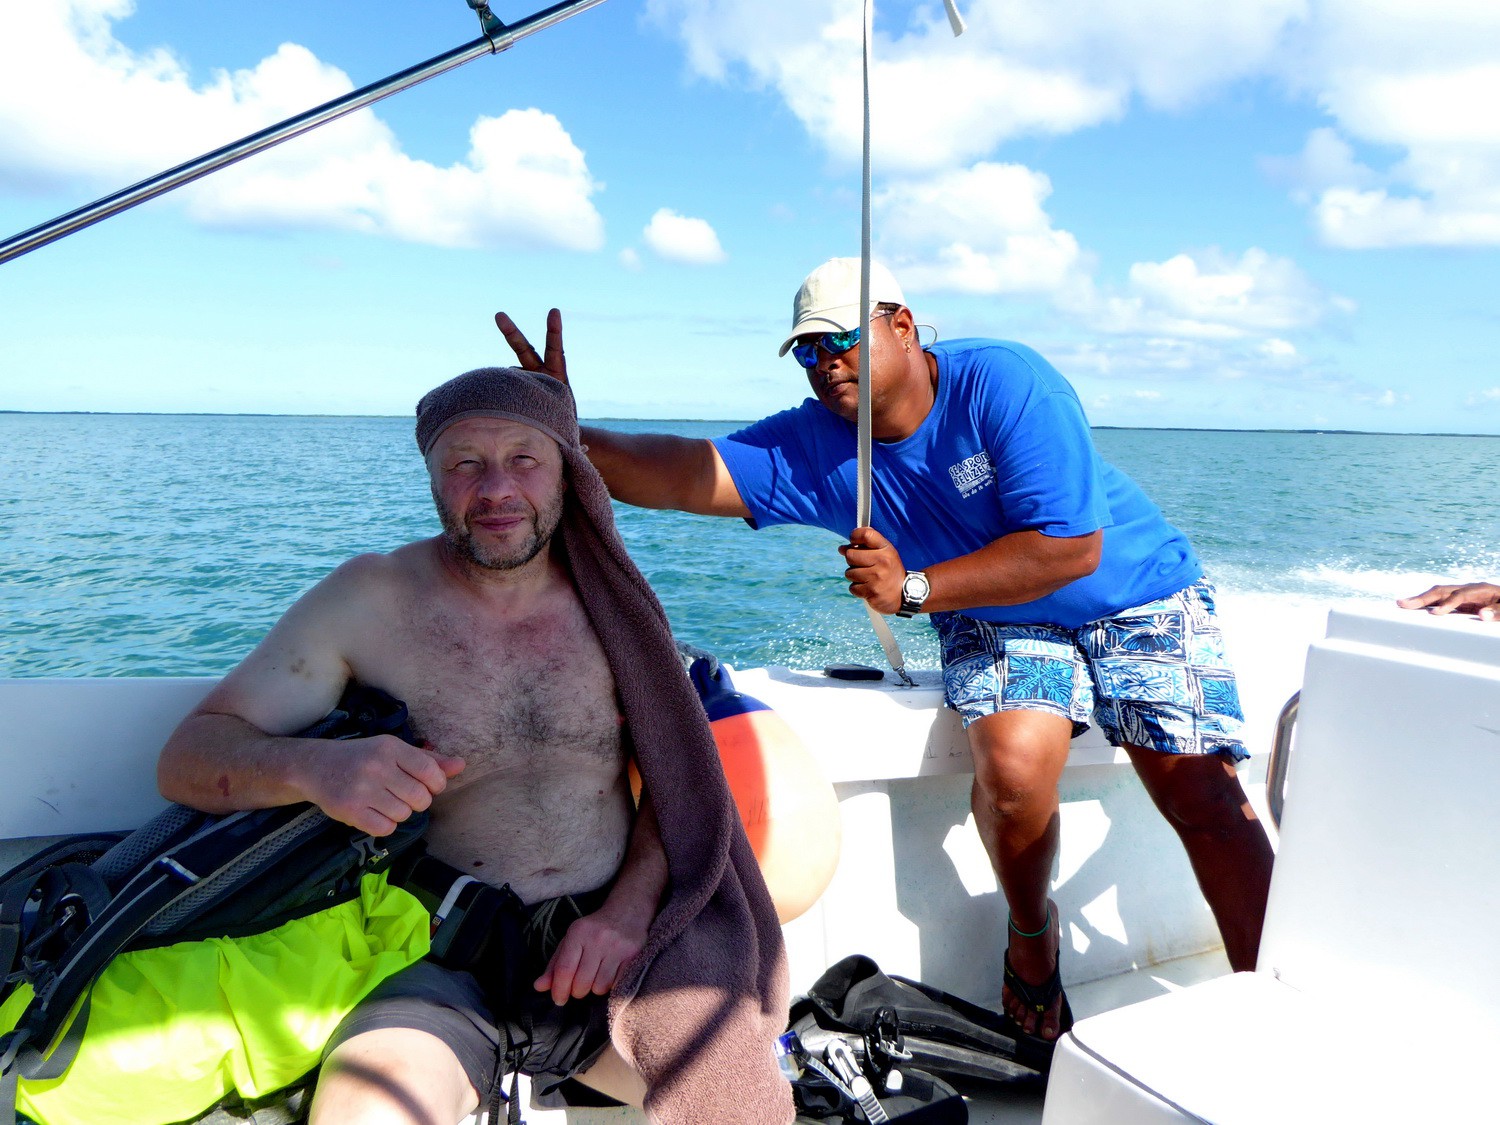 Heading back to Belize City - Tommy with our boatman